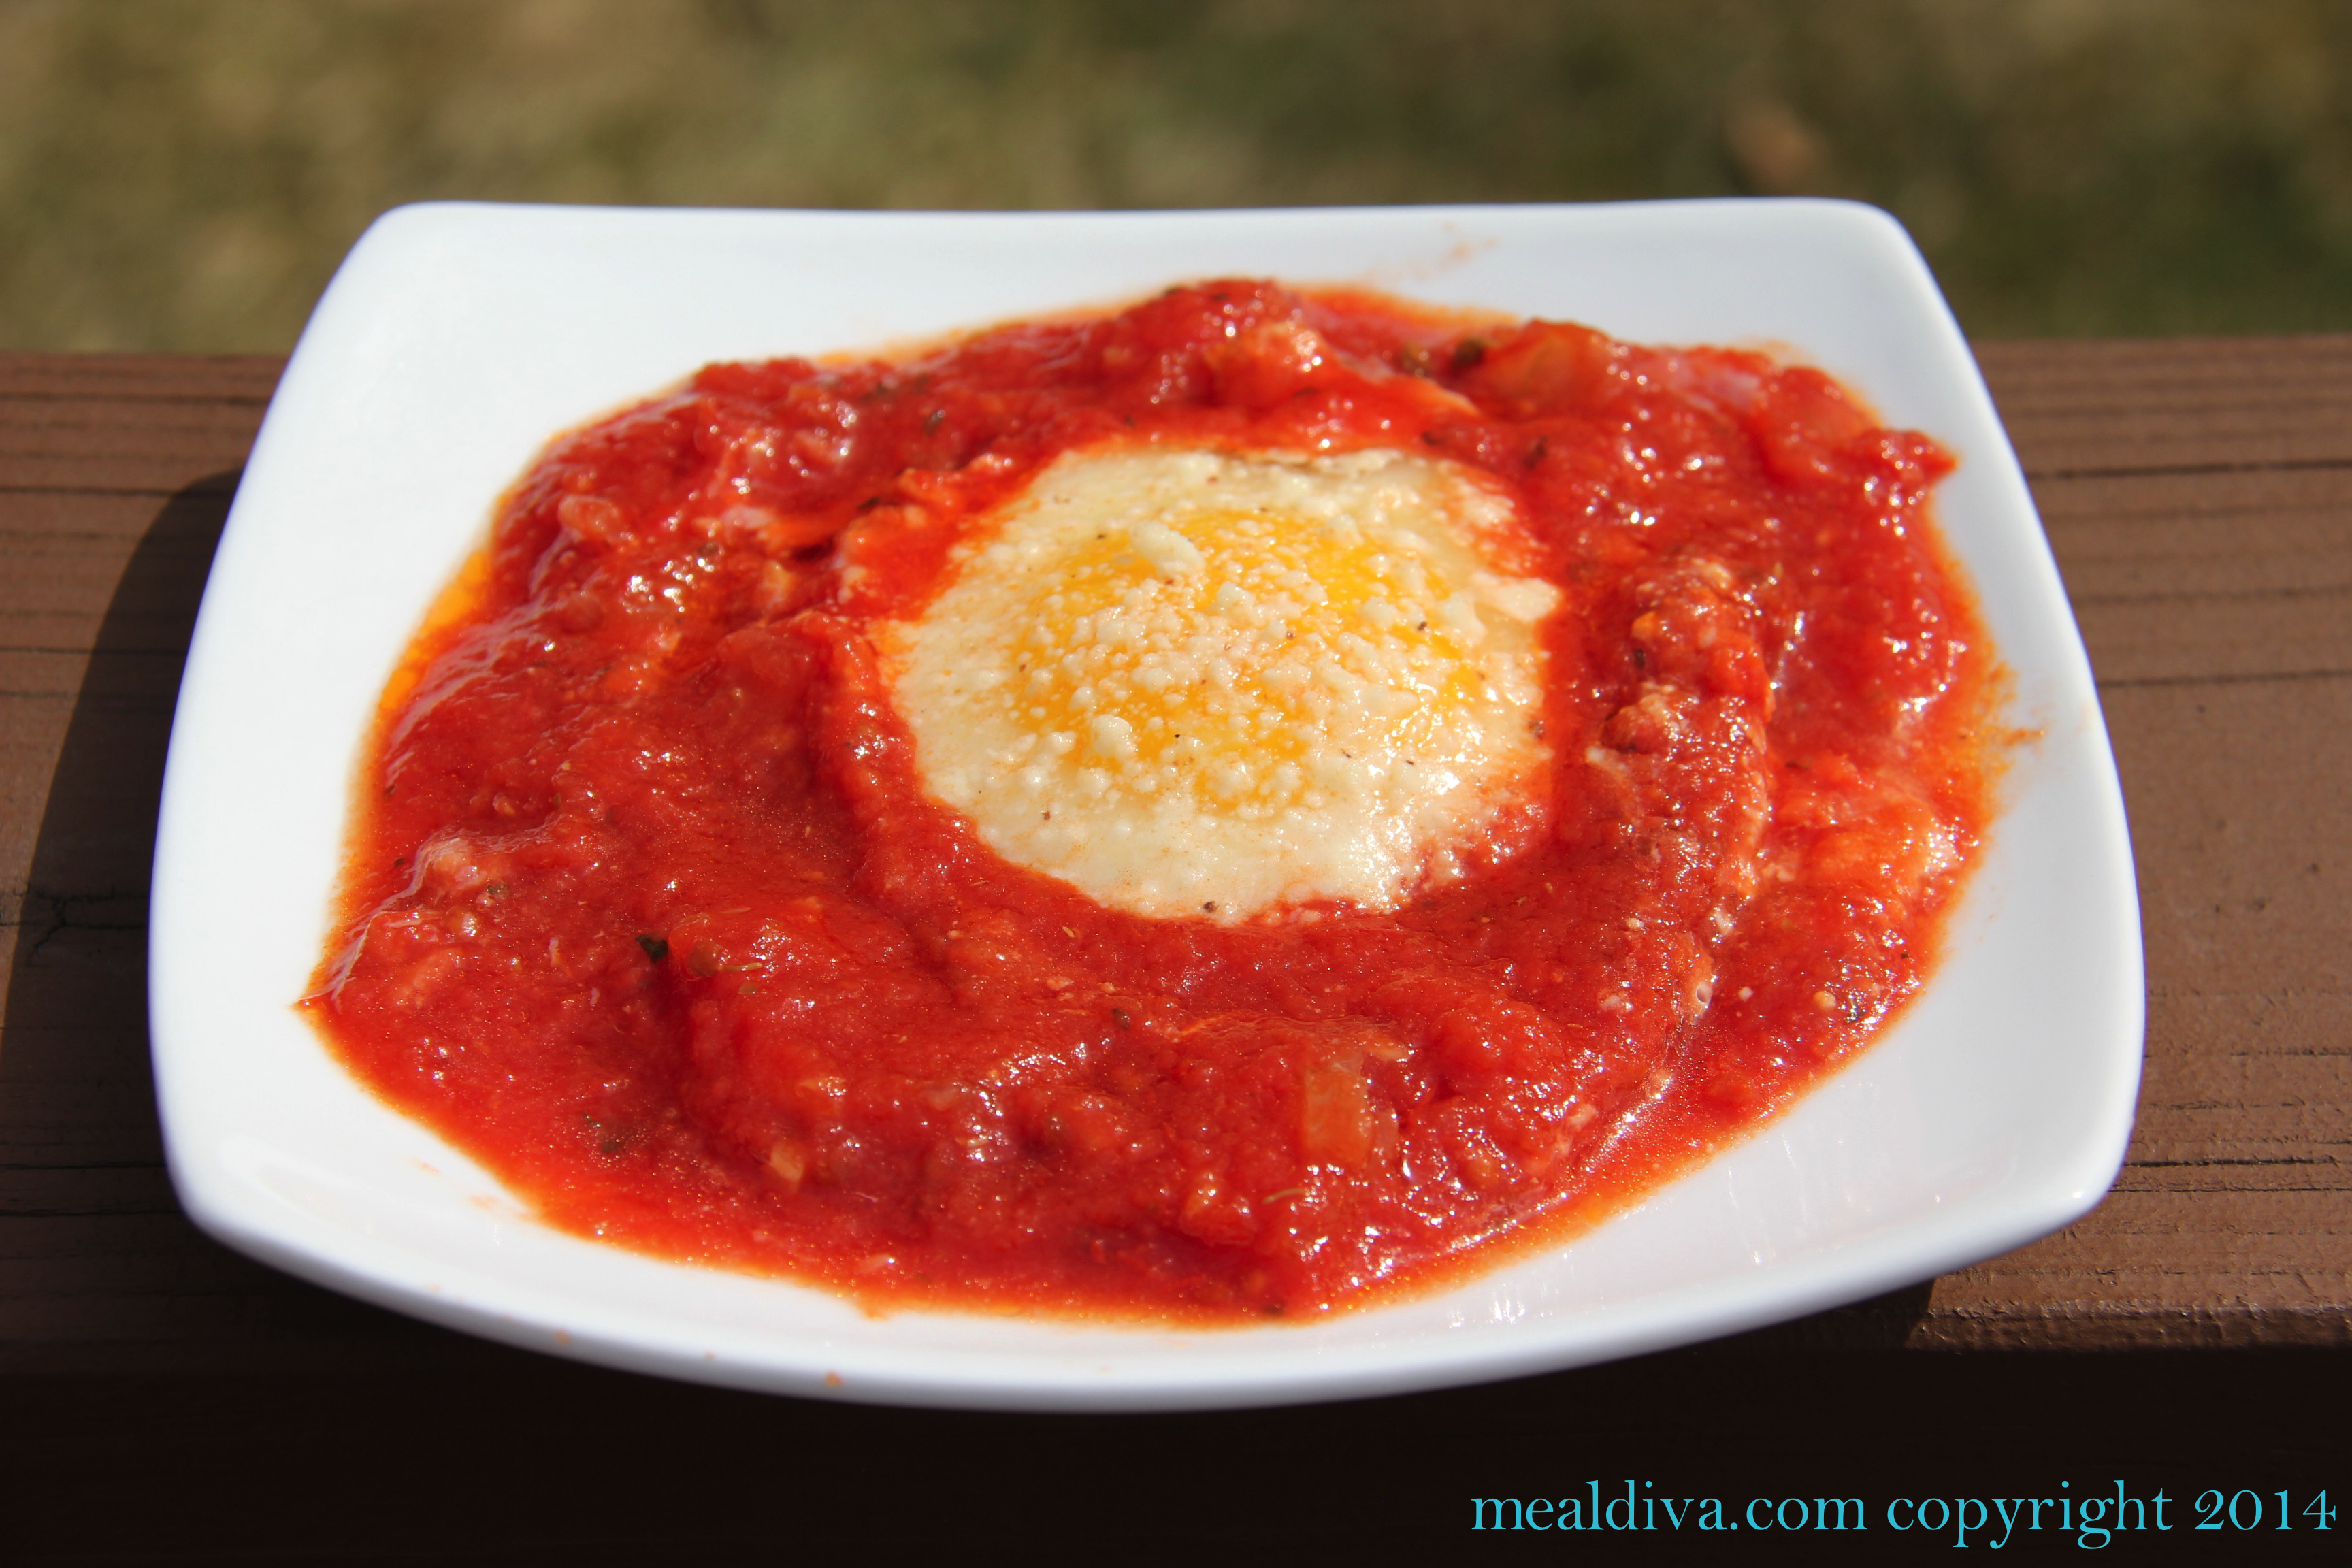 Spicy Eggs in Purgatory